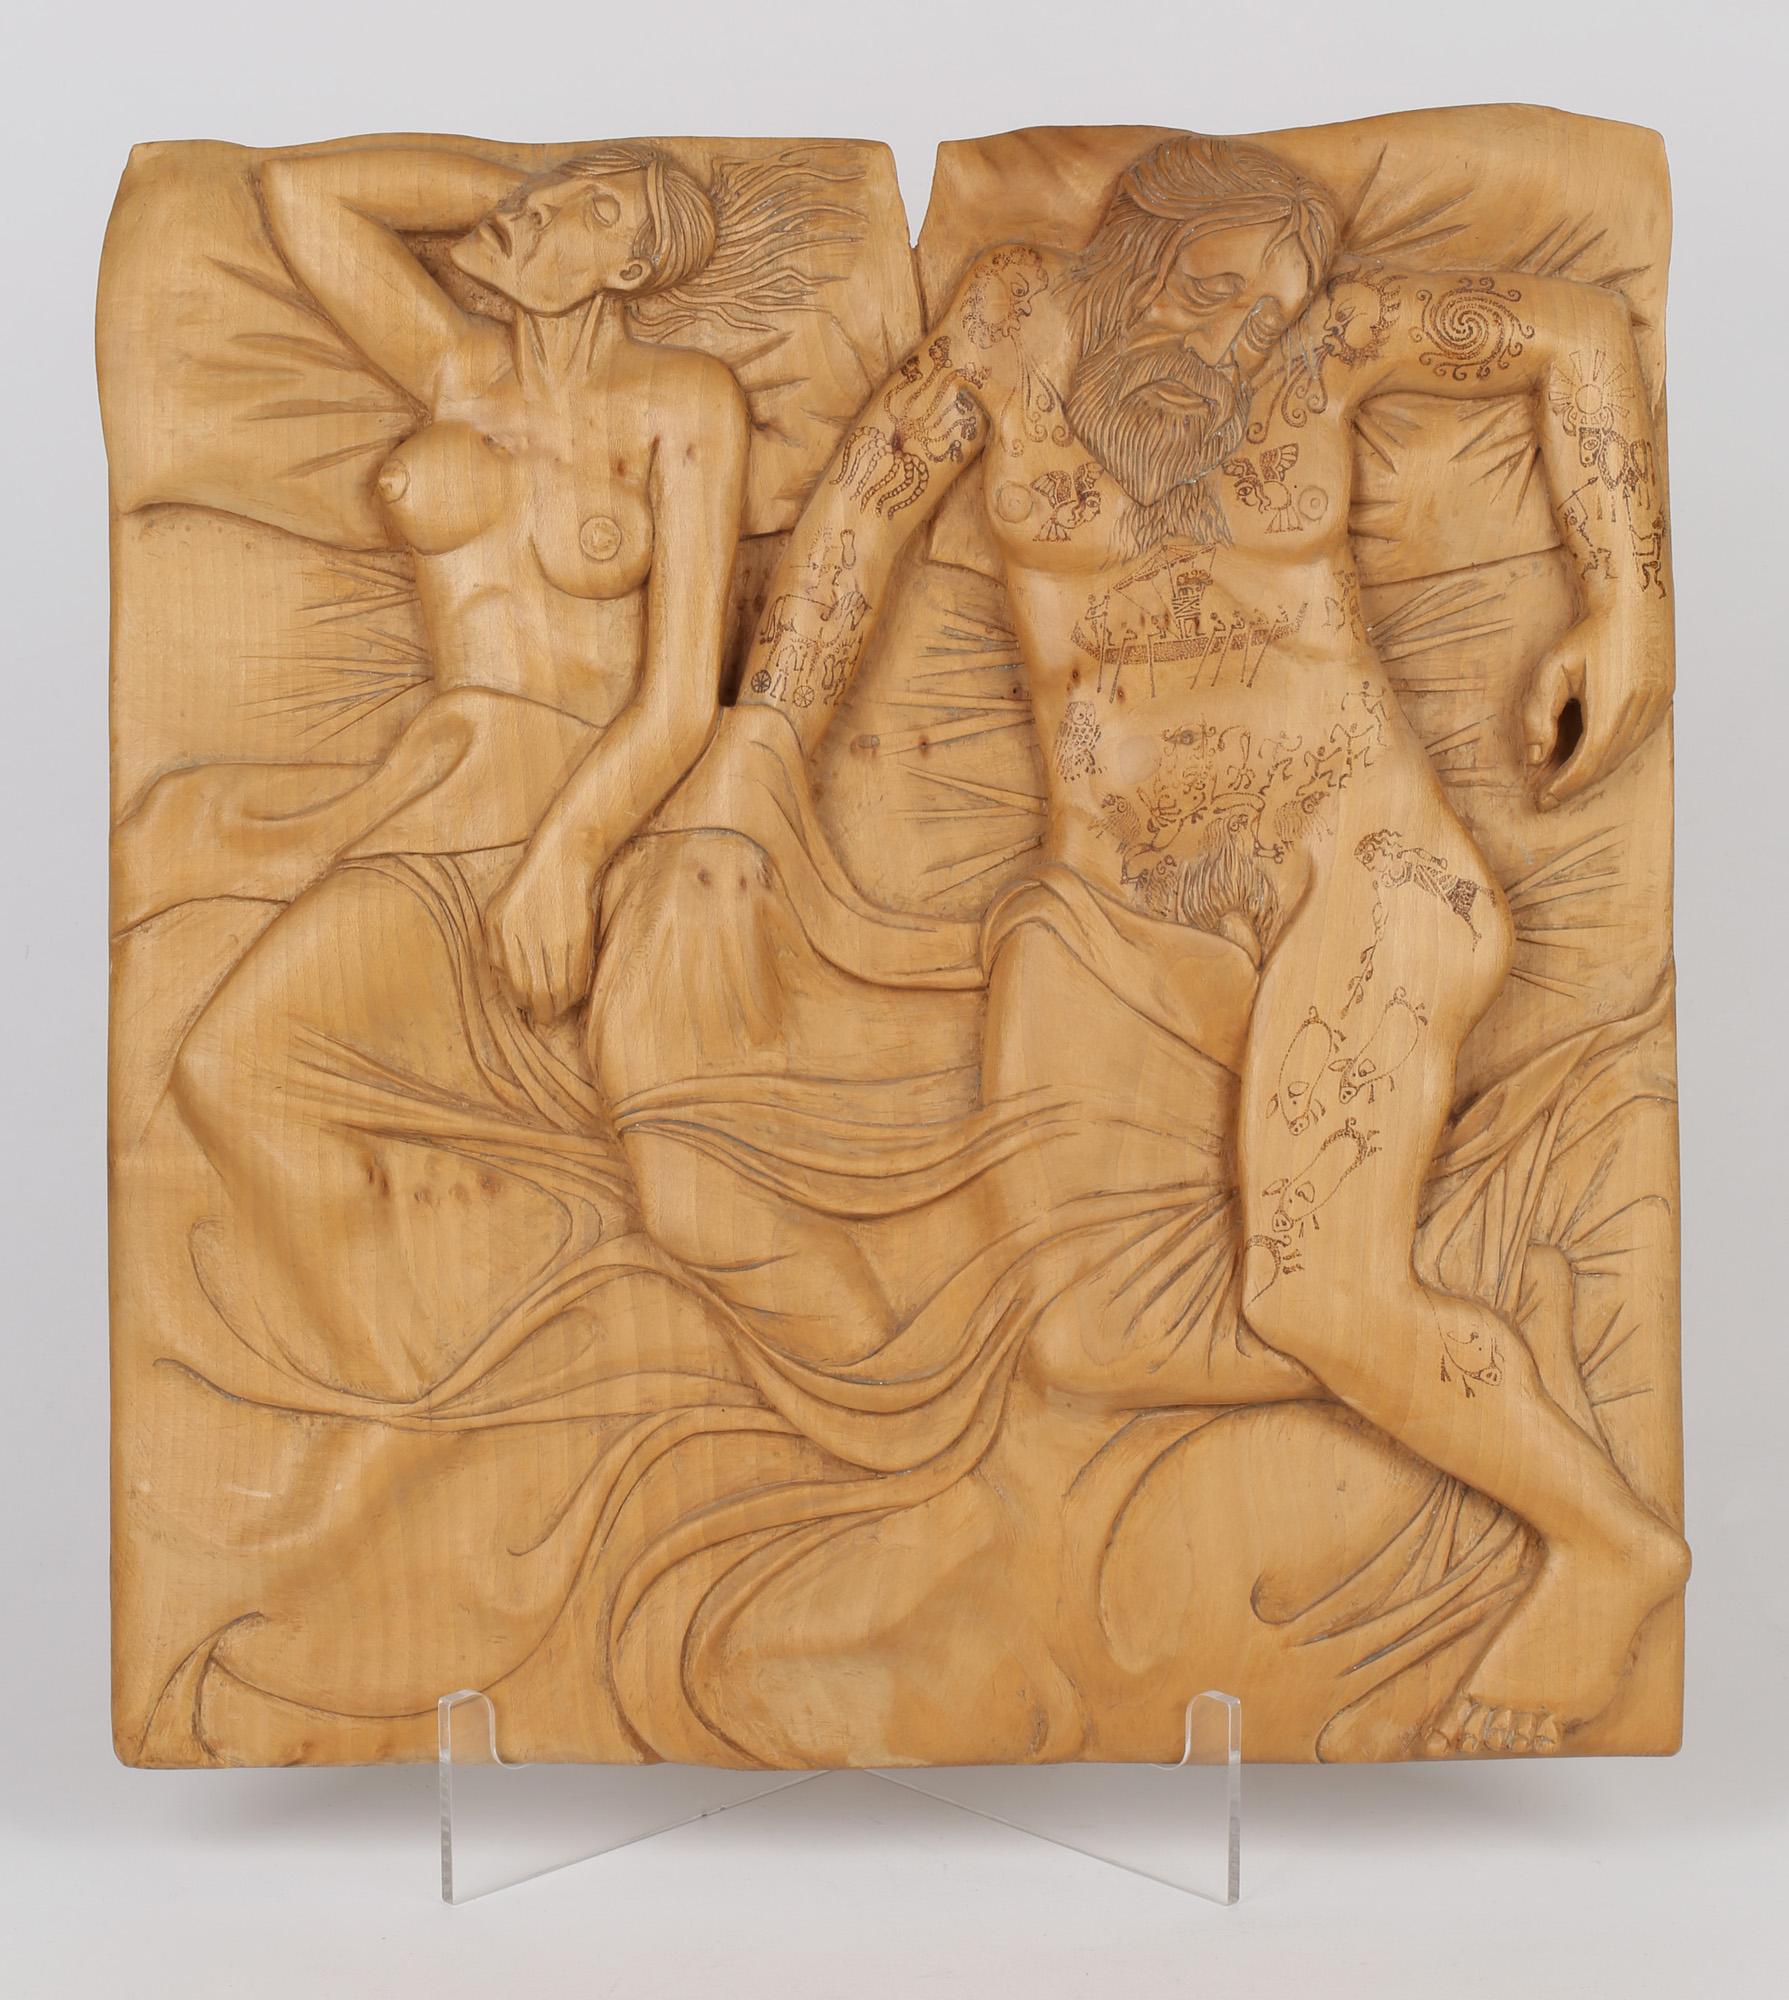 A rare, unique and very unusual sculptural hand carved wooden plaque depicting a nude couple in bed signed John Baldwin (b. London, 1937) and dated 1985. The rectangular shaped plaque is carved in deep relief and depicts a bearded man sleeping